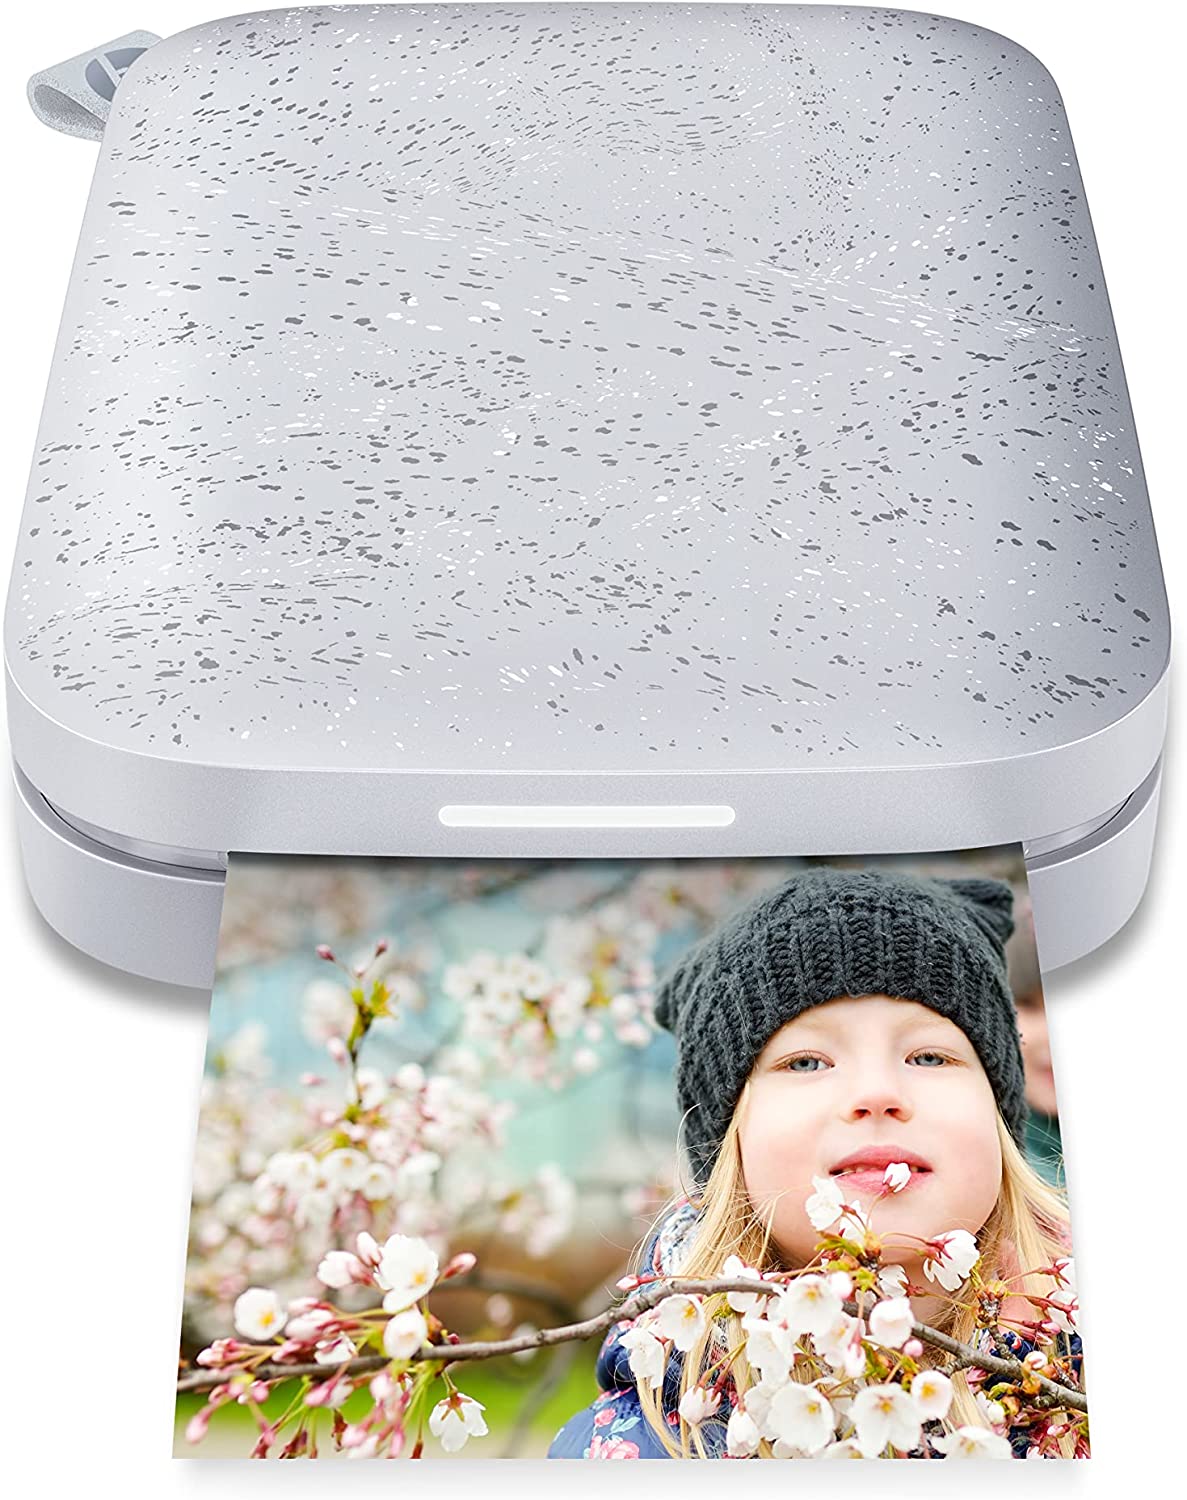 HP Sprocket Portable Photo Printer (Noir) – Instantly Print 2x3”  Sticky-backed Photos from Your Phone